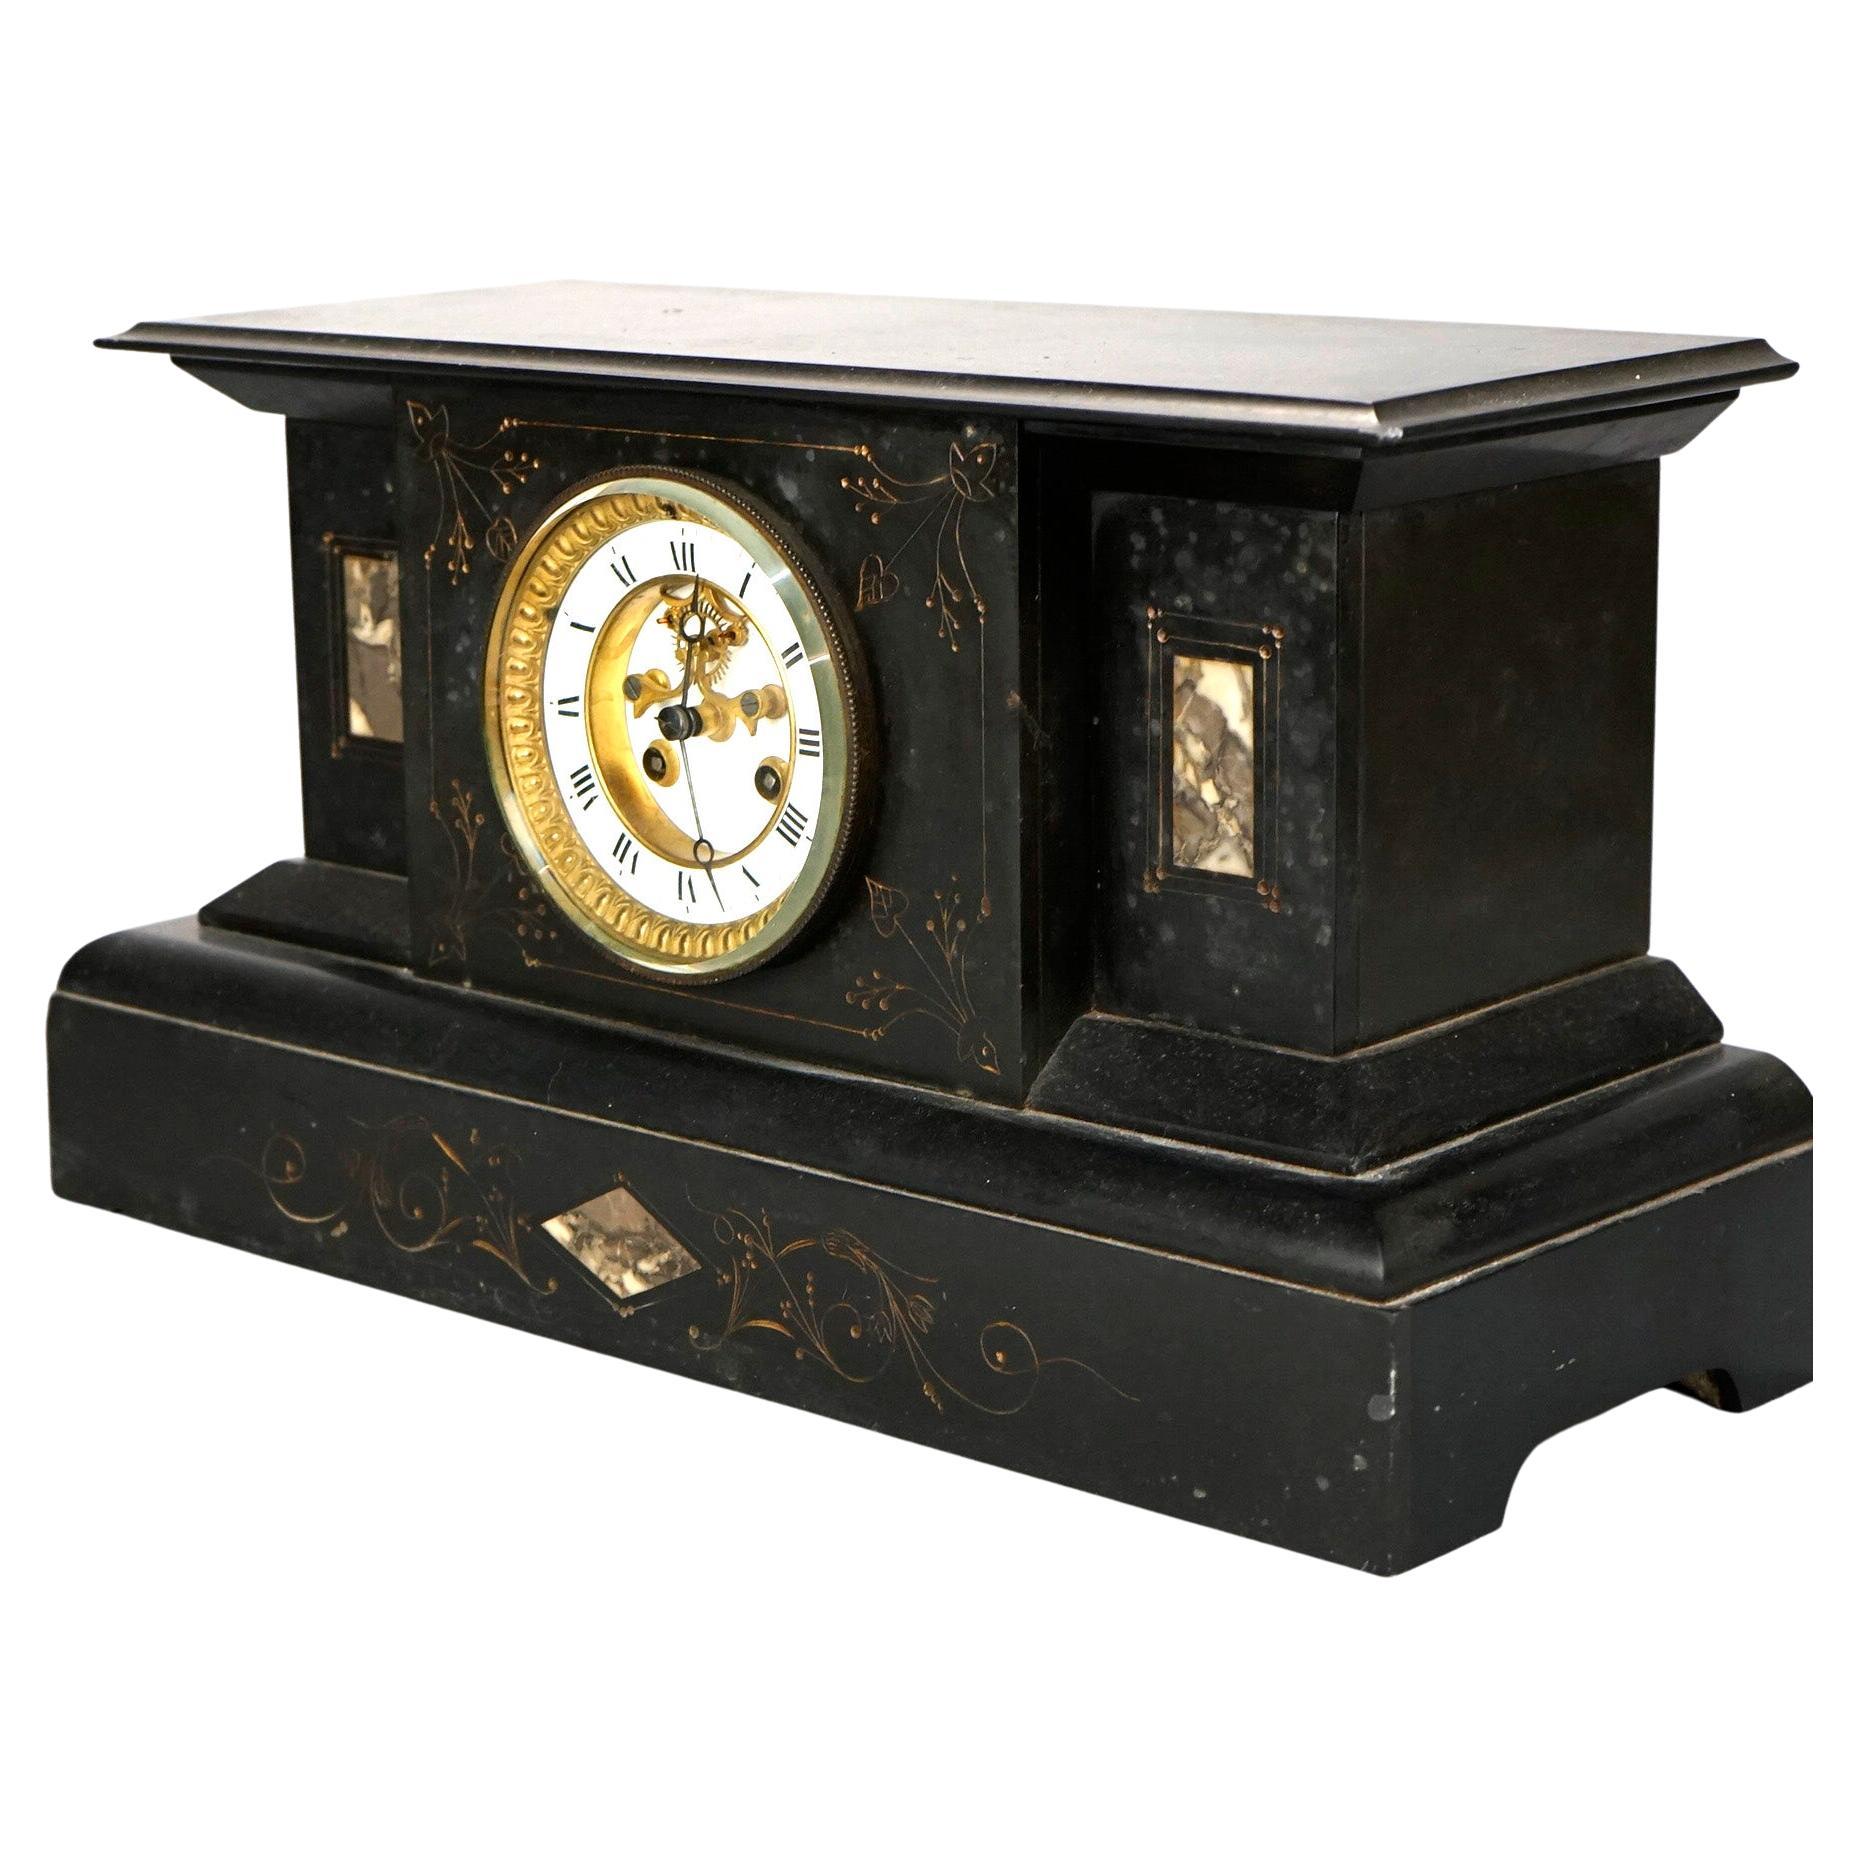 An antique Egyptian Revival garniture set offers slate mantel clock with inset marble, incised and gilt foliate decoration and flanking urn form stands, 19th century

Measures- Stands 9.5''H x 5.25''W x 4.25''D; Clock 9.5''H x 17.5''W x 7''D
